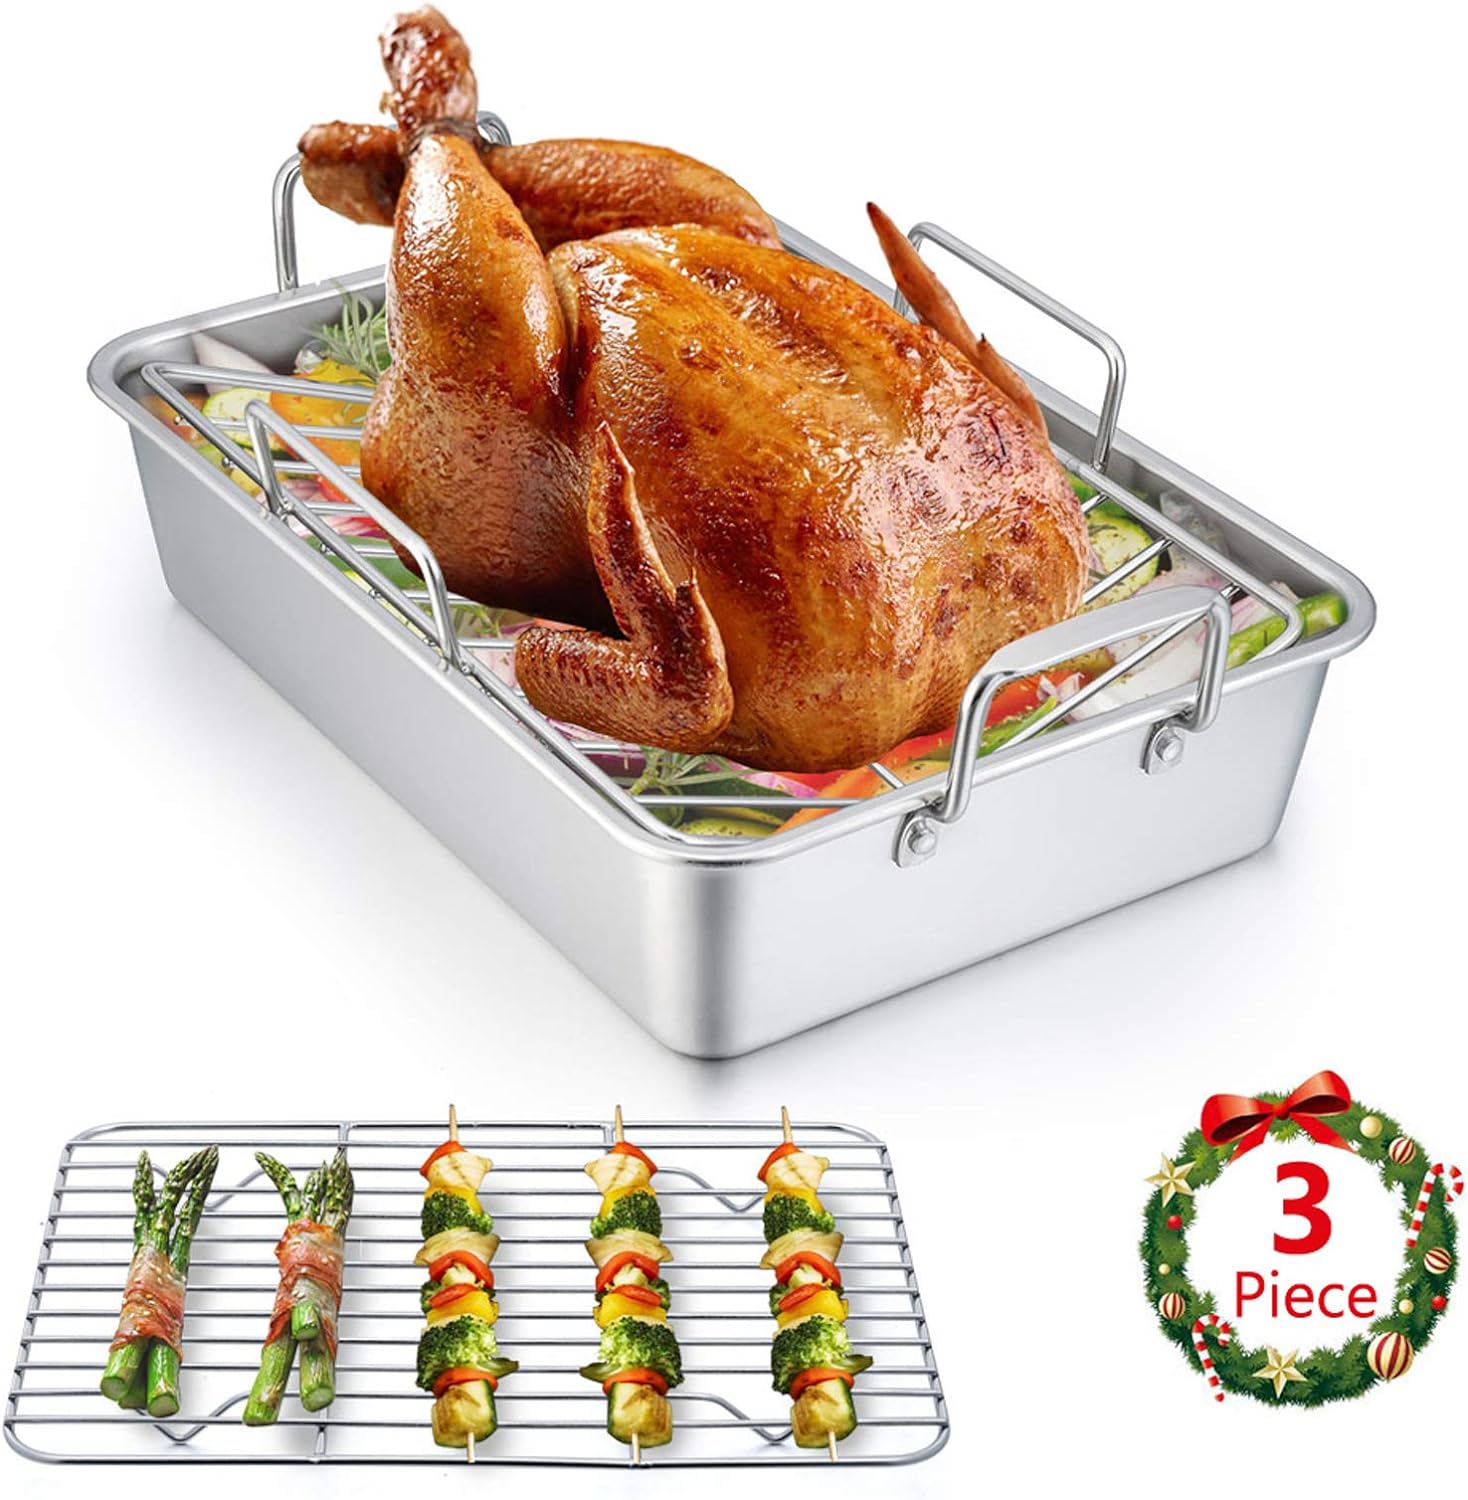 Small Roasting Pan, E-far 14 Inch Heavy Duty Stainless Steel Turkey Roaster with V Rack  Baking Rack Set, Metal Deep Broiling Pan for Oven Cooking Lasagna Meat Chicken - Dishwasher Safe